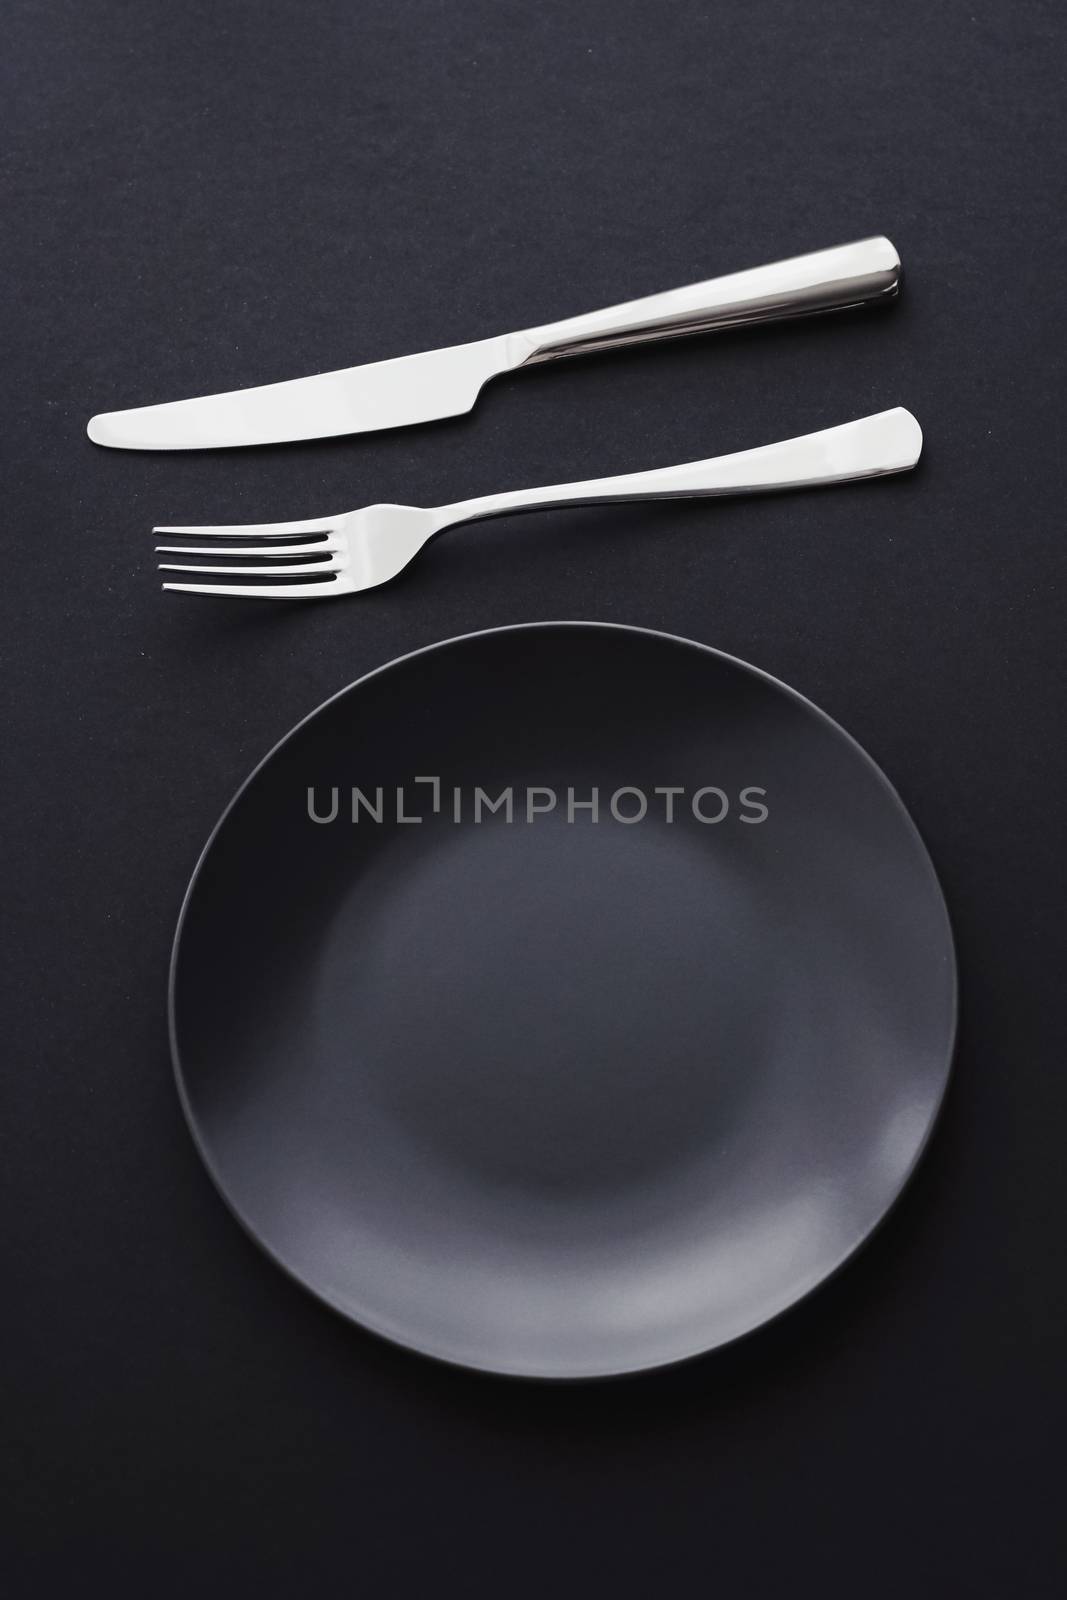 Empty plates and silverware on black background, premium tableware for holiday dinner, minimalistic design and diet concept